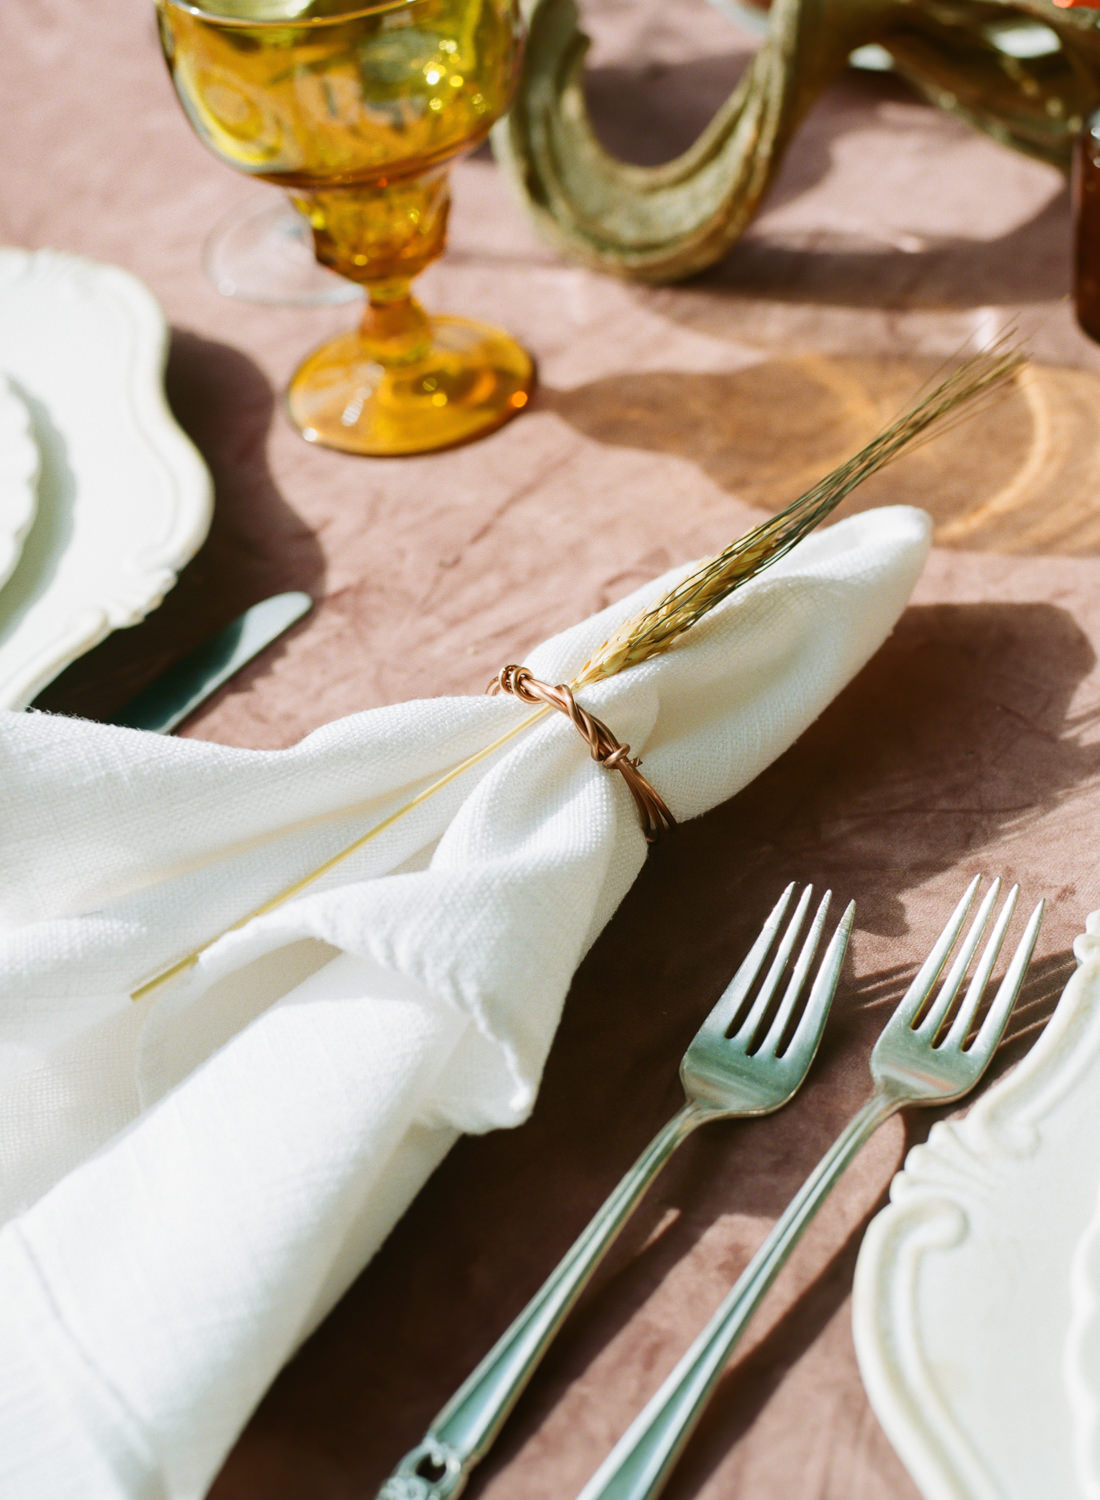 Amber colored glass, white napkins with wheat decor accent, vintage china, rose velvet tablecloth, pumpkin decor; Thanksgiving table at Emerson Fields; St. Louis fine art film wedding photographer Erica Robnett Photography